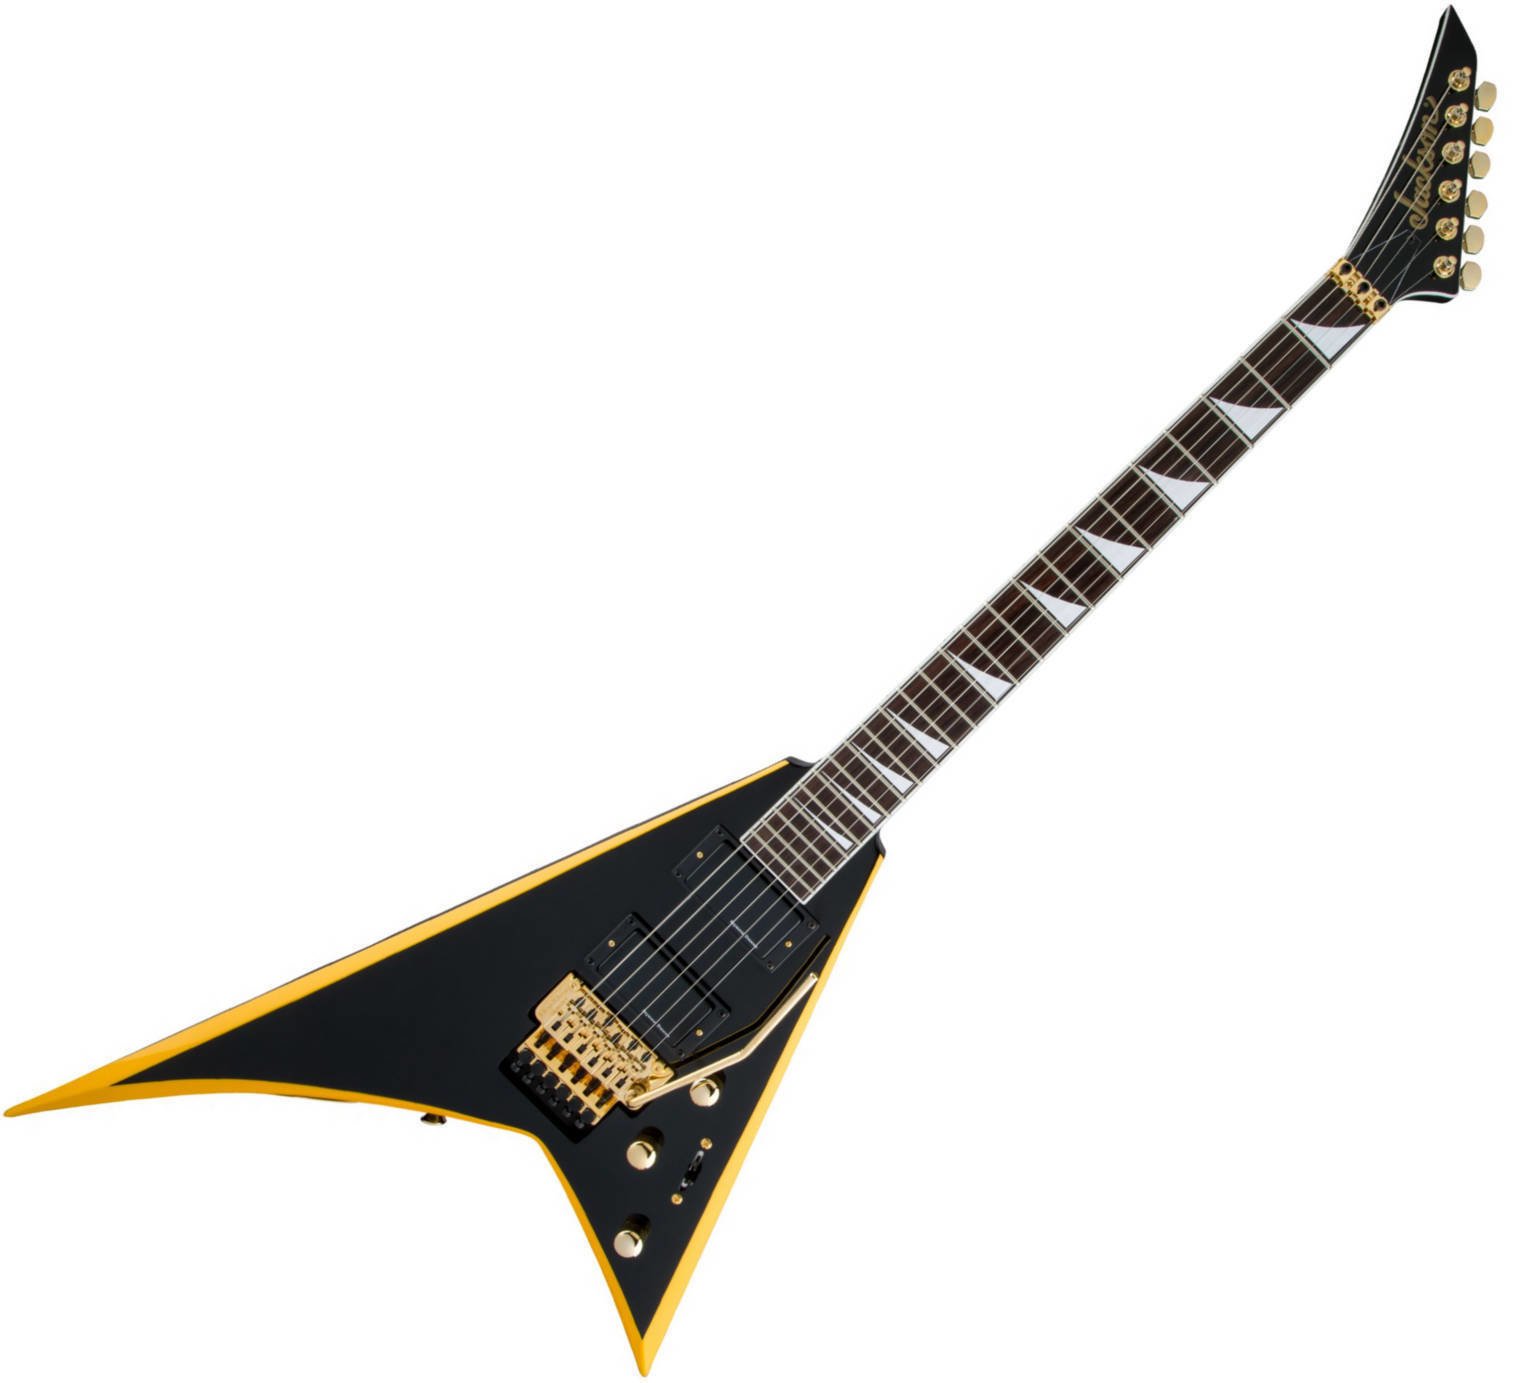 Electric guitar Jackson X Series Rhoads RRX24 IL BLK with YLW Bevels